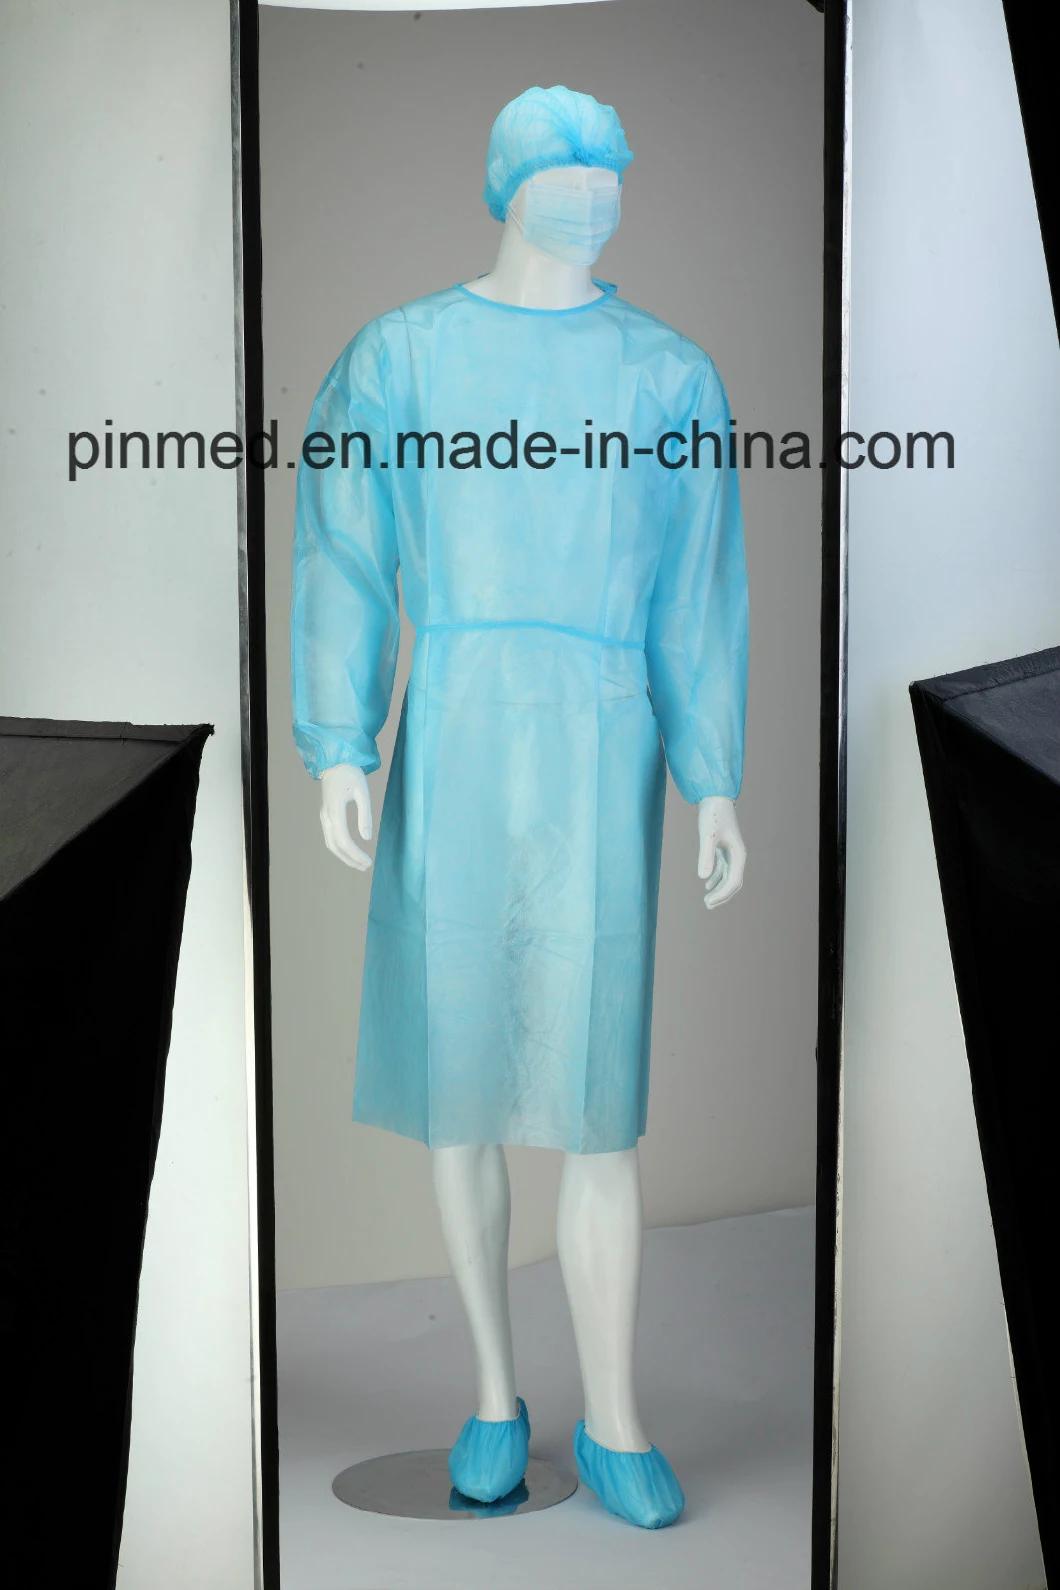 Pinmed Disposable PP+PE Isolation Gown